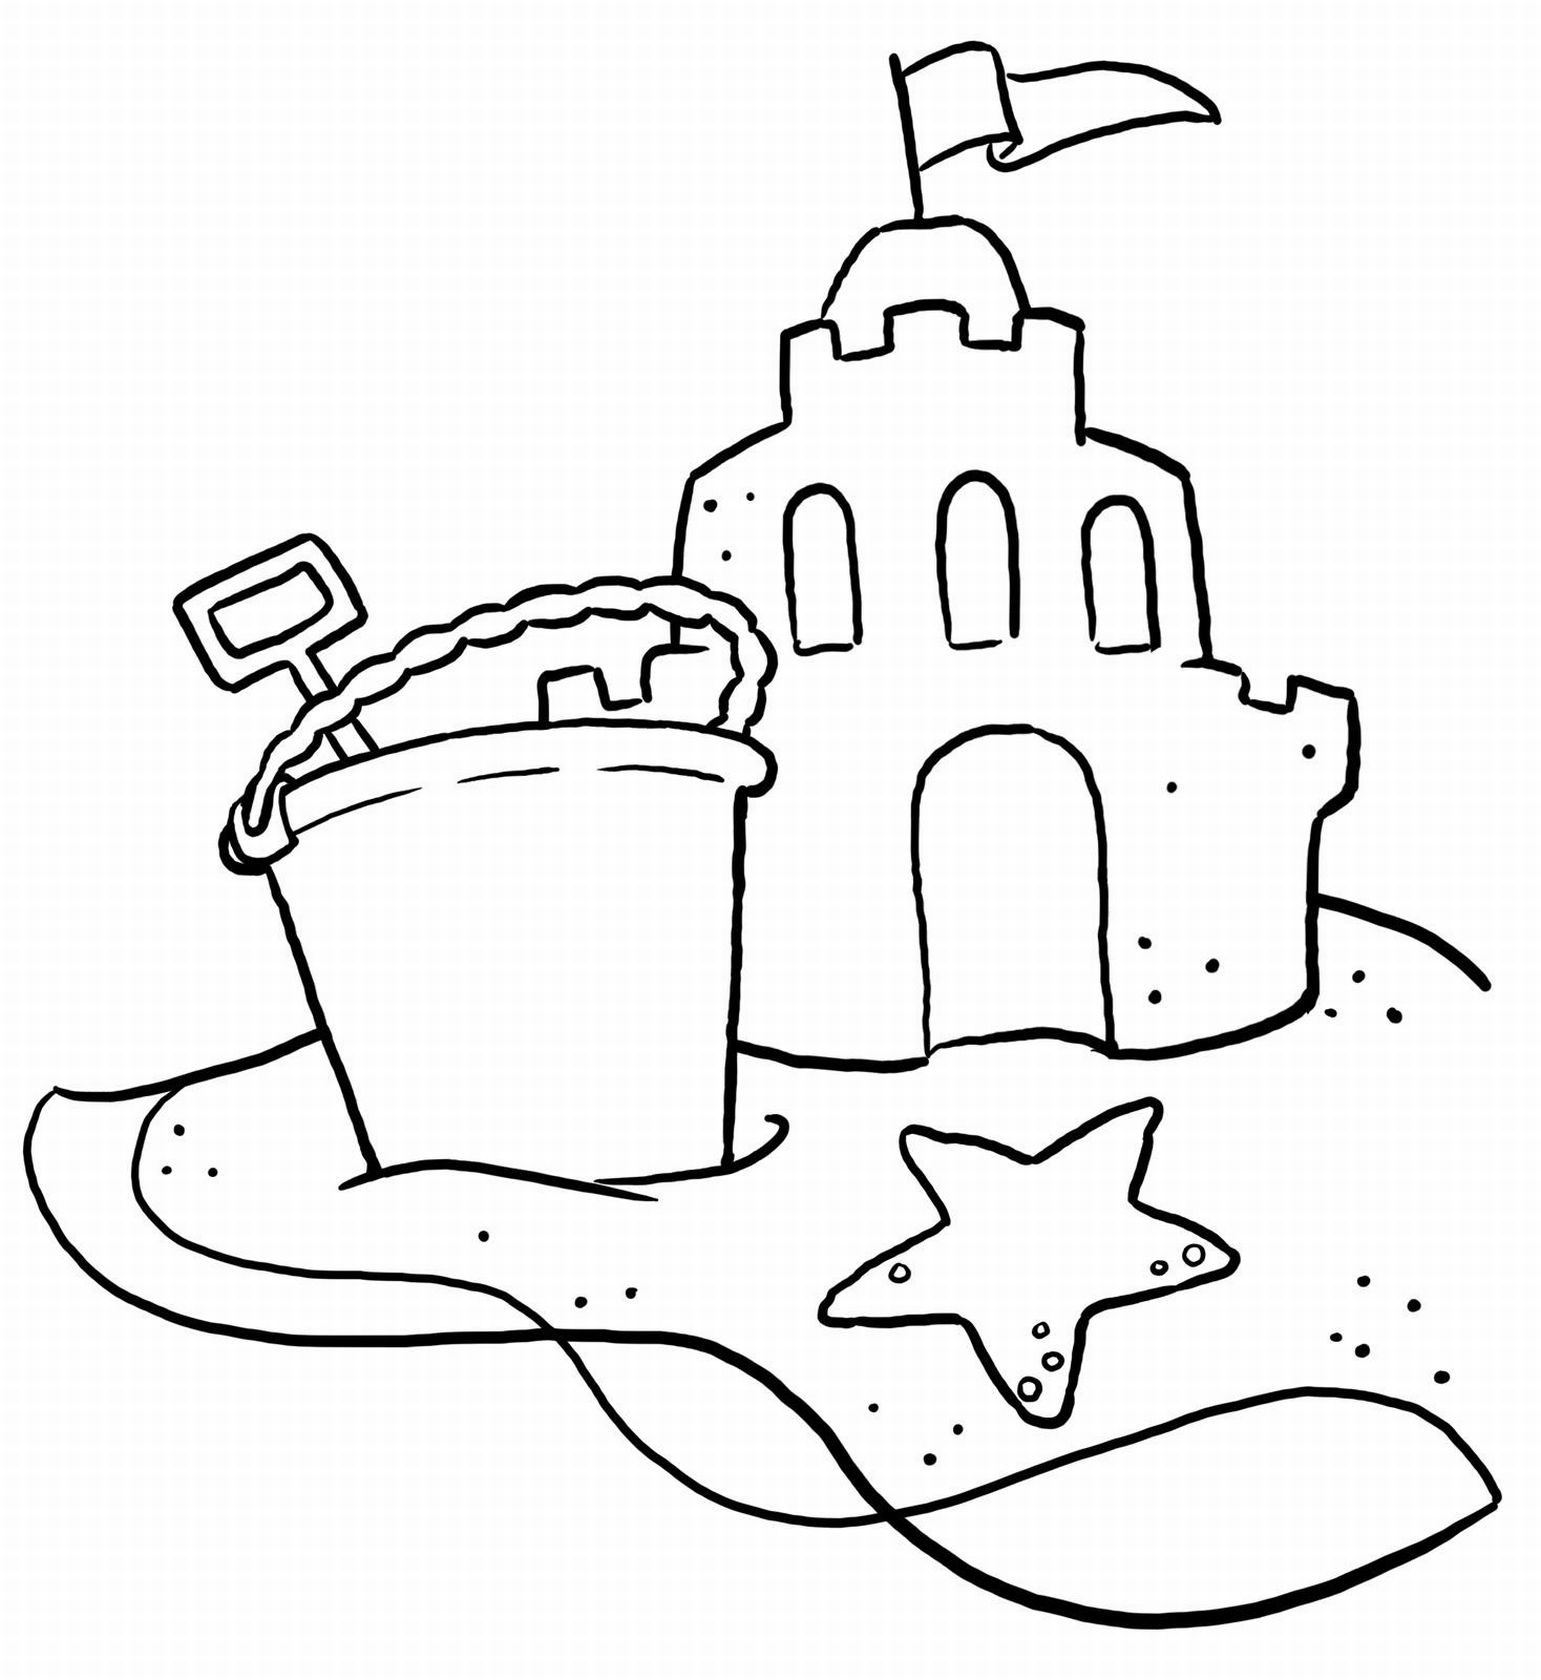 Summer Safety Coloring Pages Summer Themed Coloring Pages At Getdrawings Free For Personal